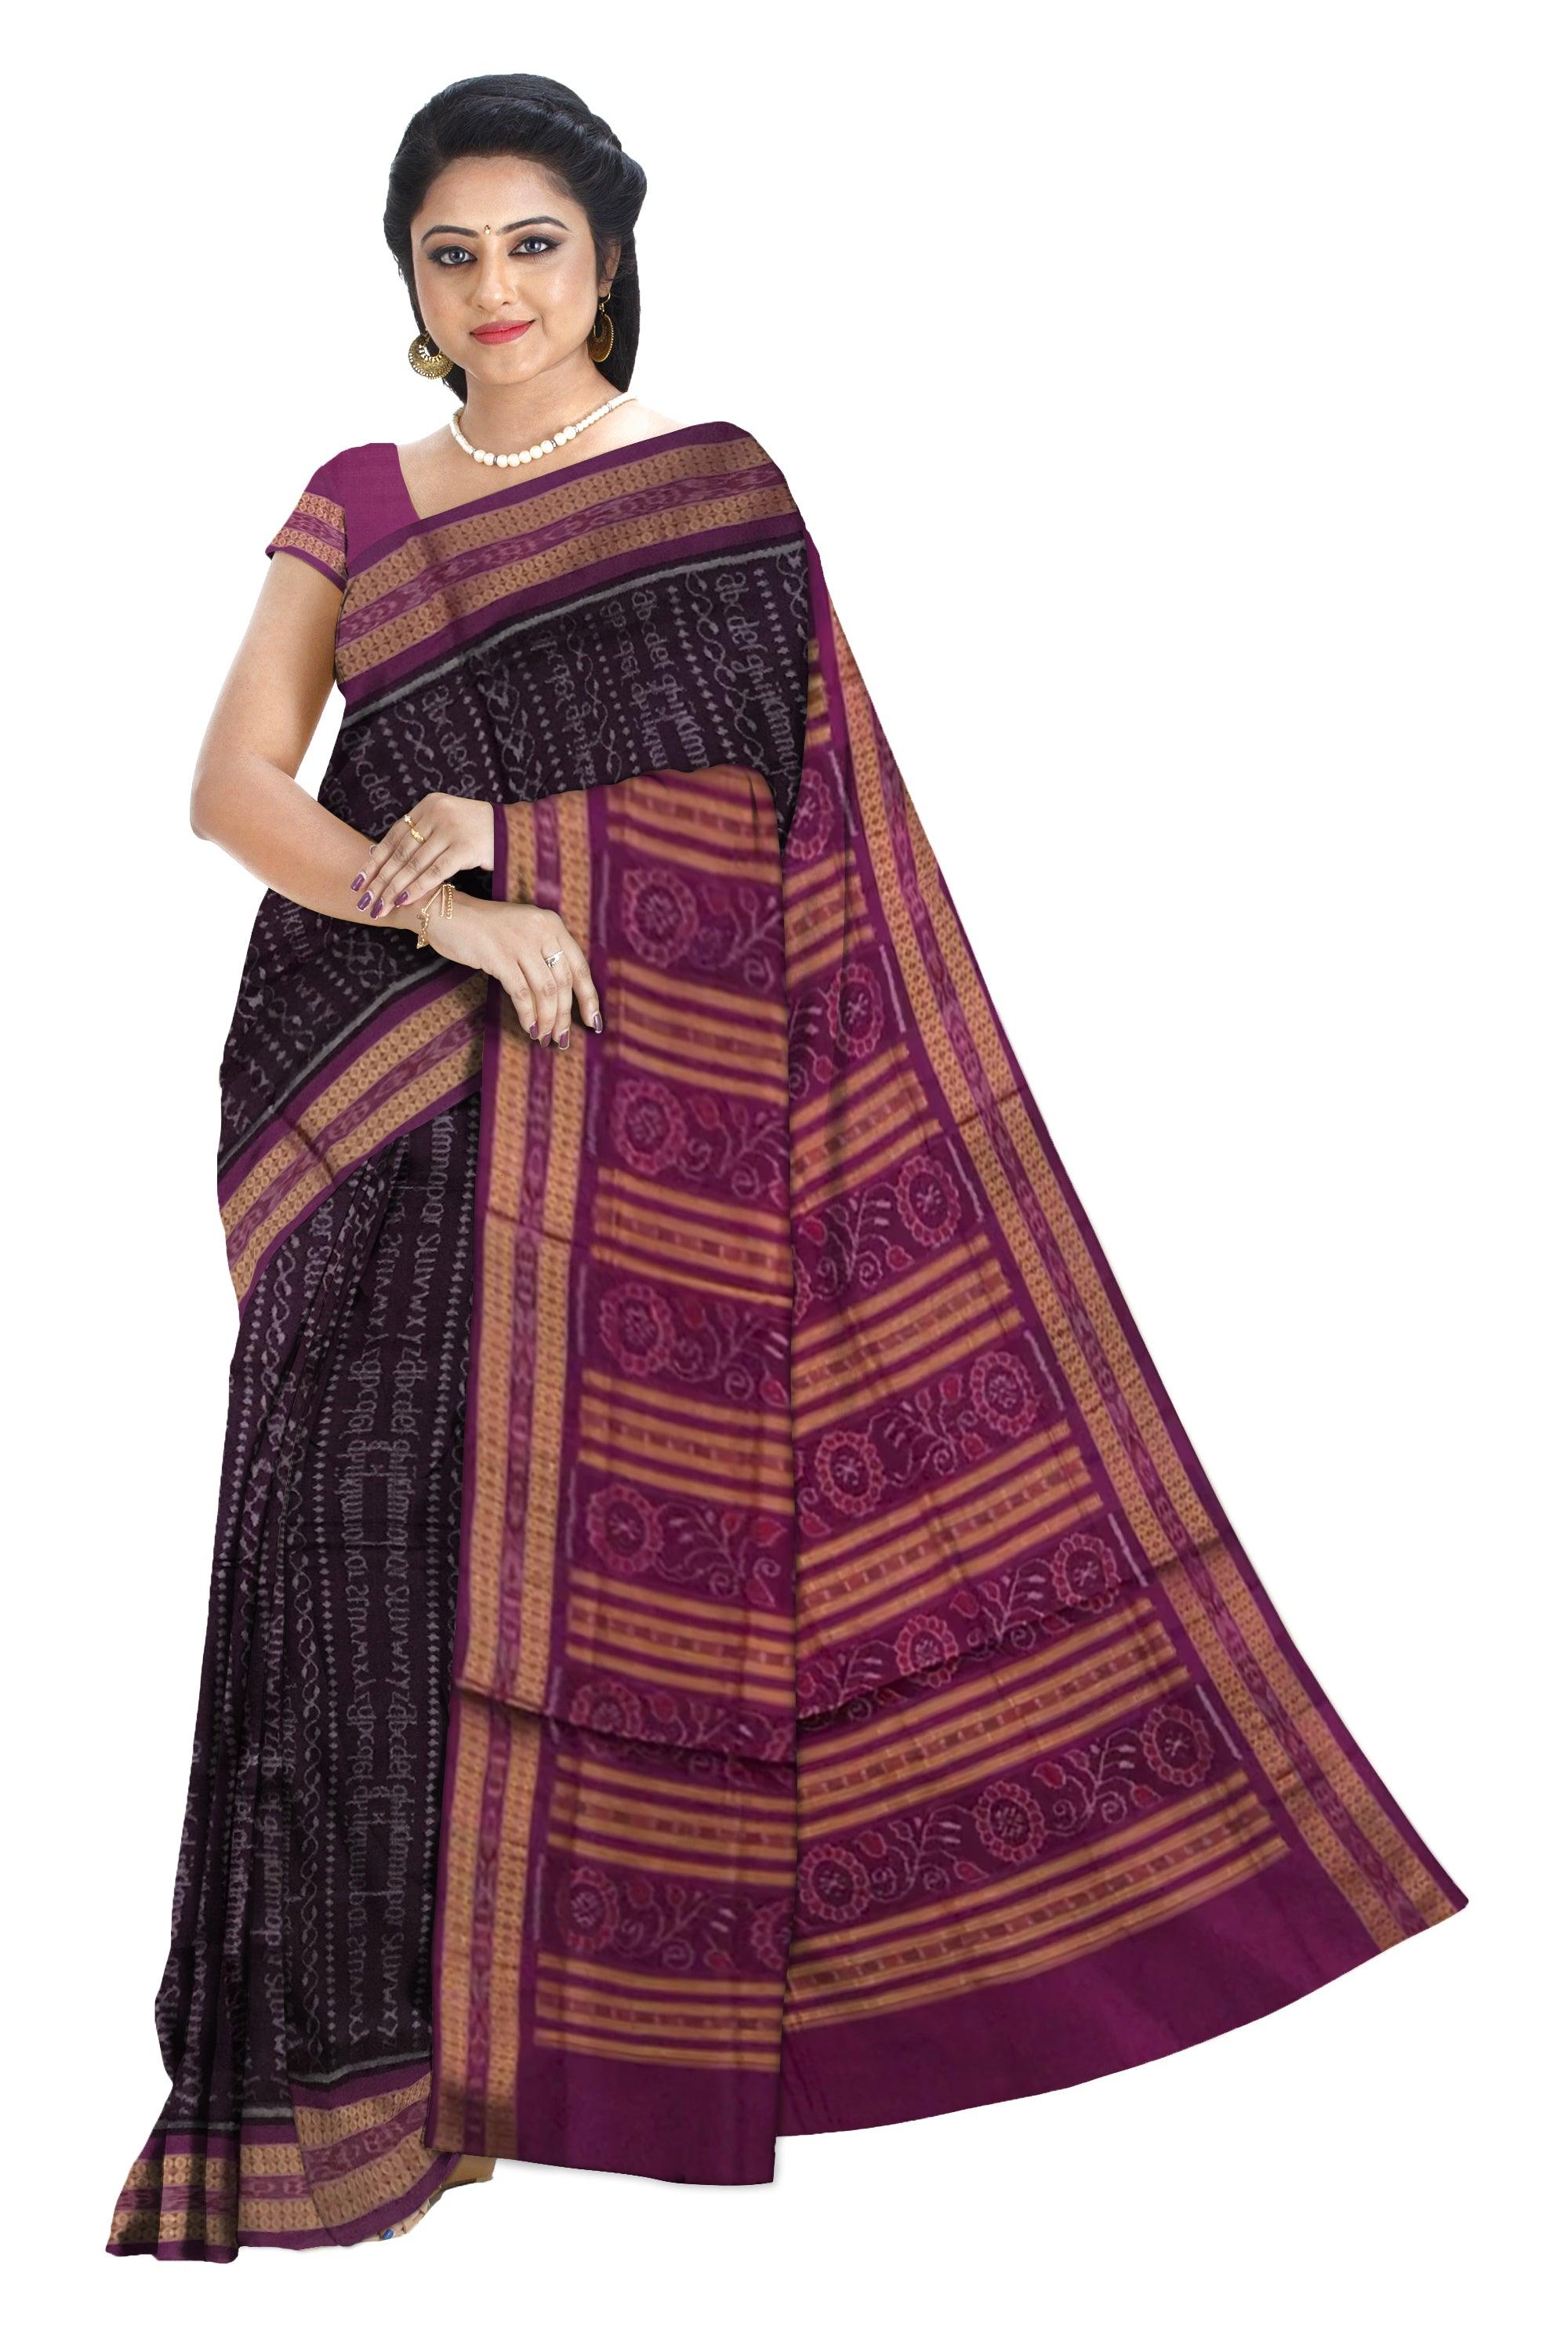 DIFFERENT LETTER PATTERN SAMBALPURI COTTON SAREE IS BLACK AND DEEPPINK COLOR BASE, COMES WITH MATCHING BLOUSE PIECE. - Koshali Arts & Crafts Enterprise